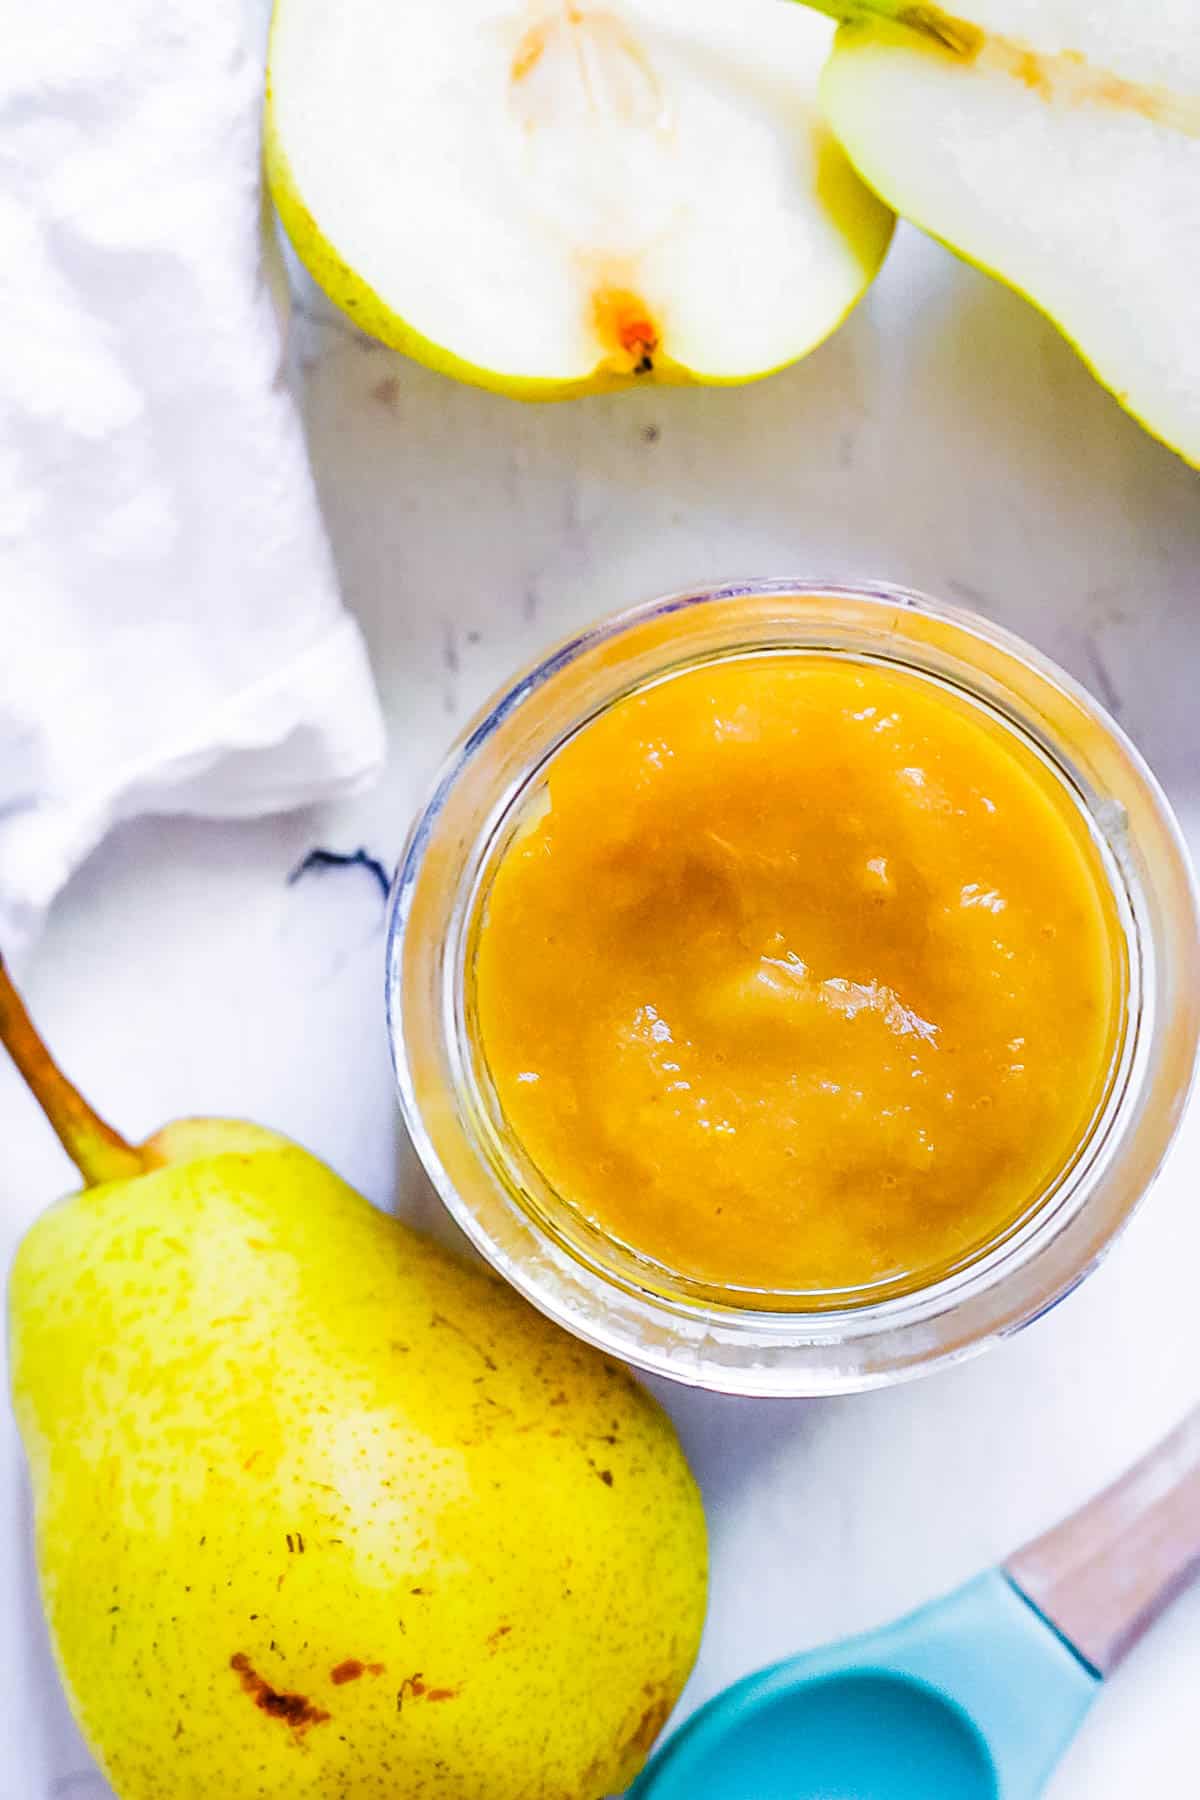 Pear baby food in a glass jar on a white countertop with cut pears on the side.